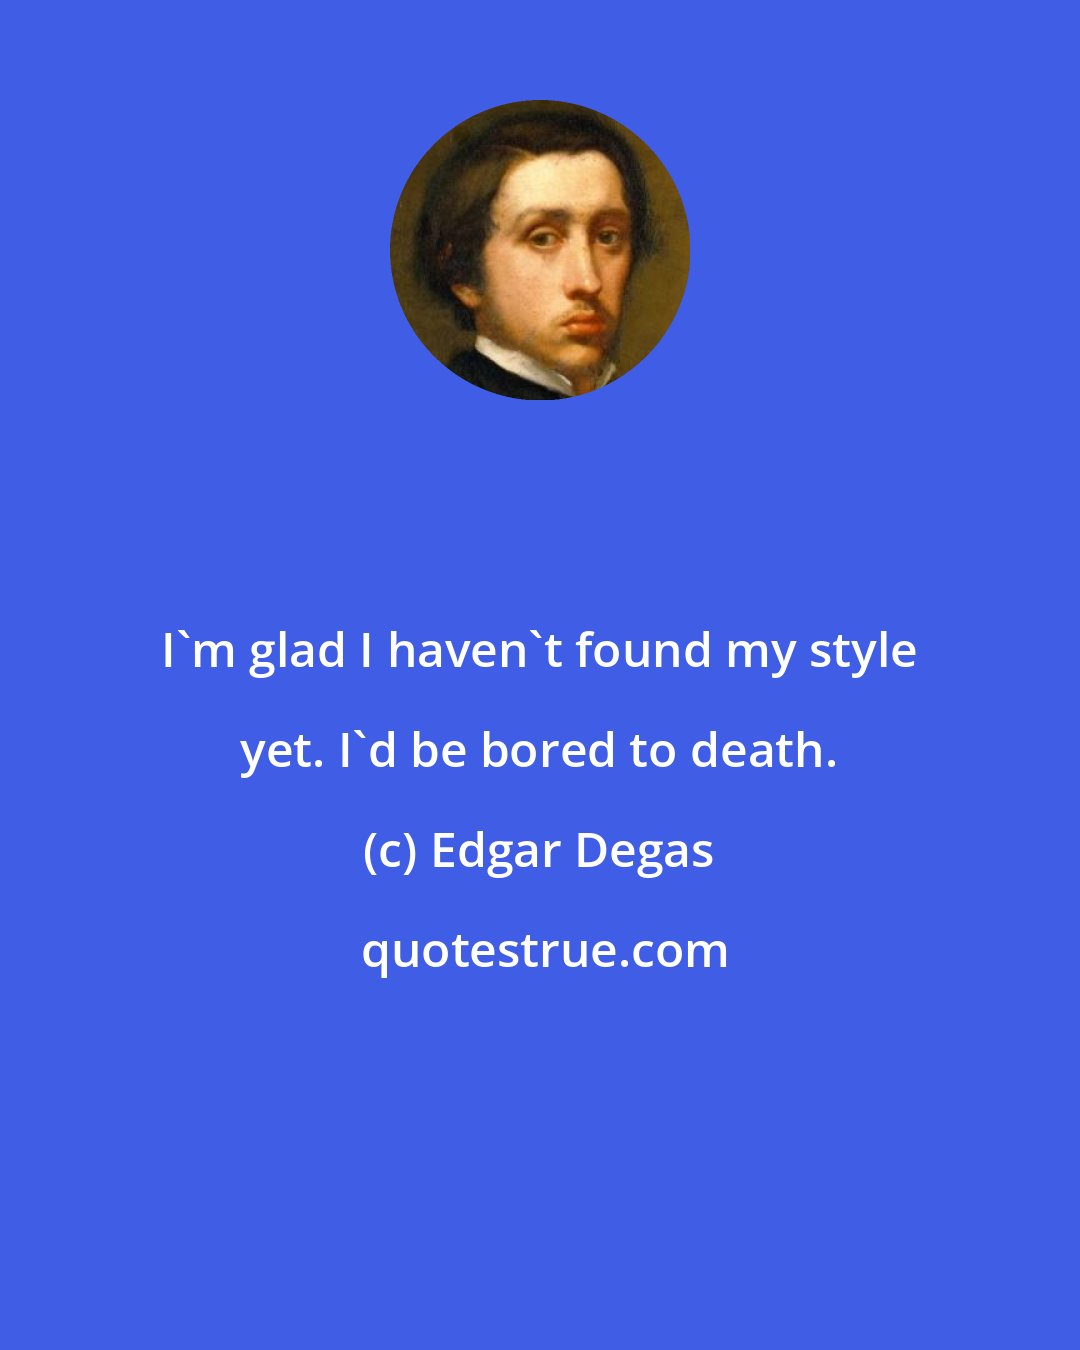 Edgar Degas: I'm glad I haven't found my style yet. I'd be bored to death.